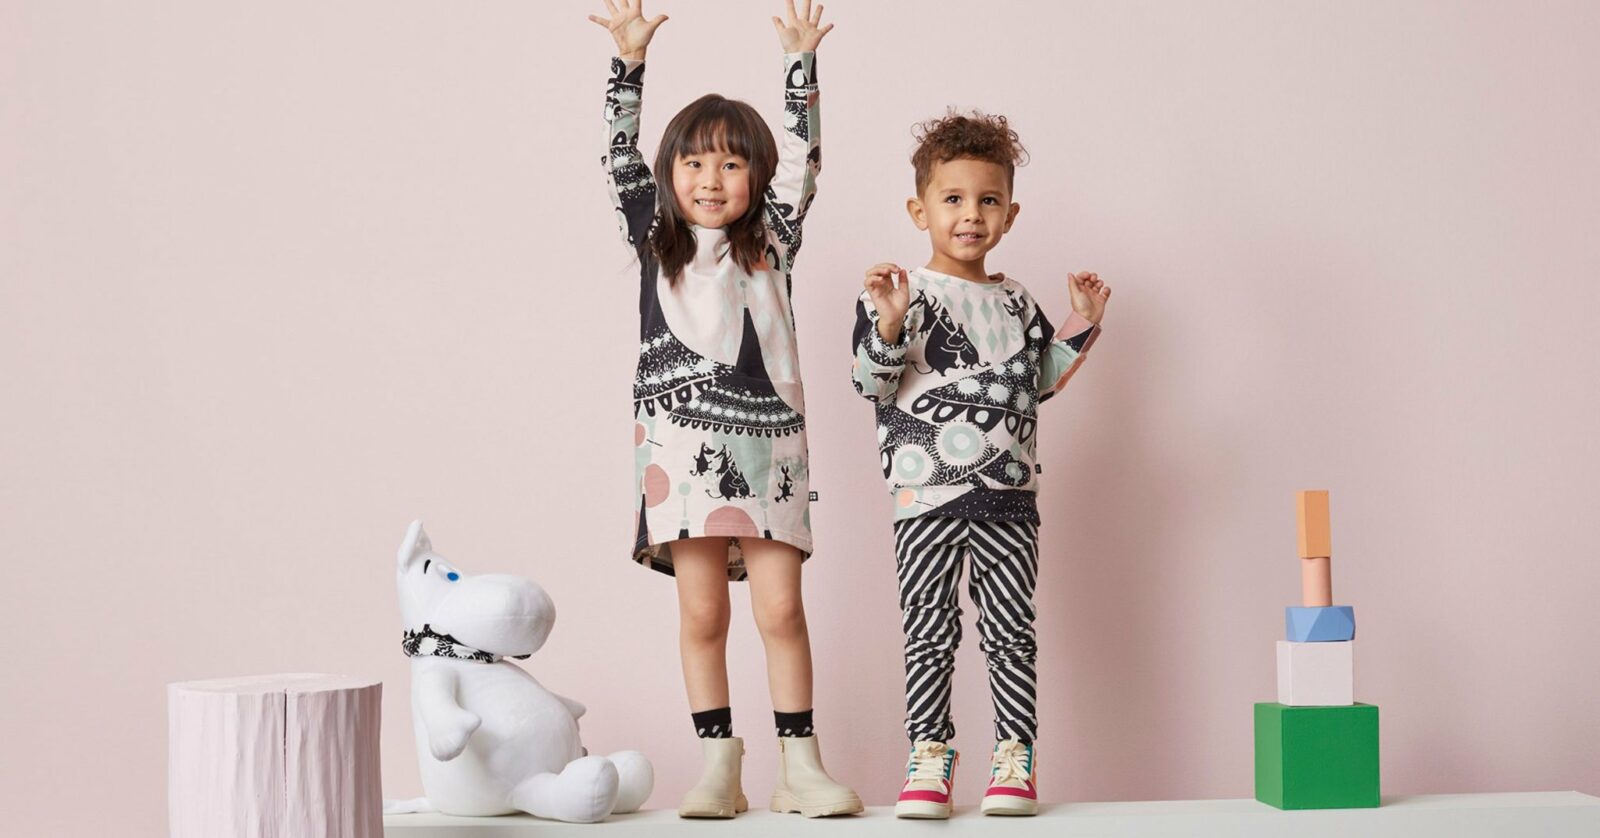 Moomin x Papu Design – a new clothing collection inspired by the 